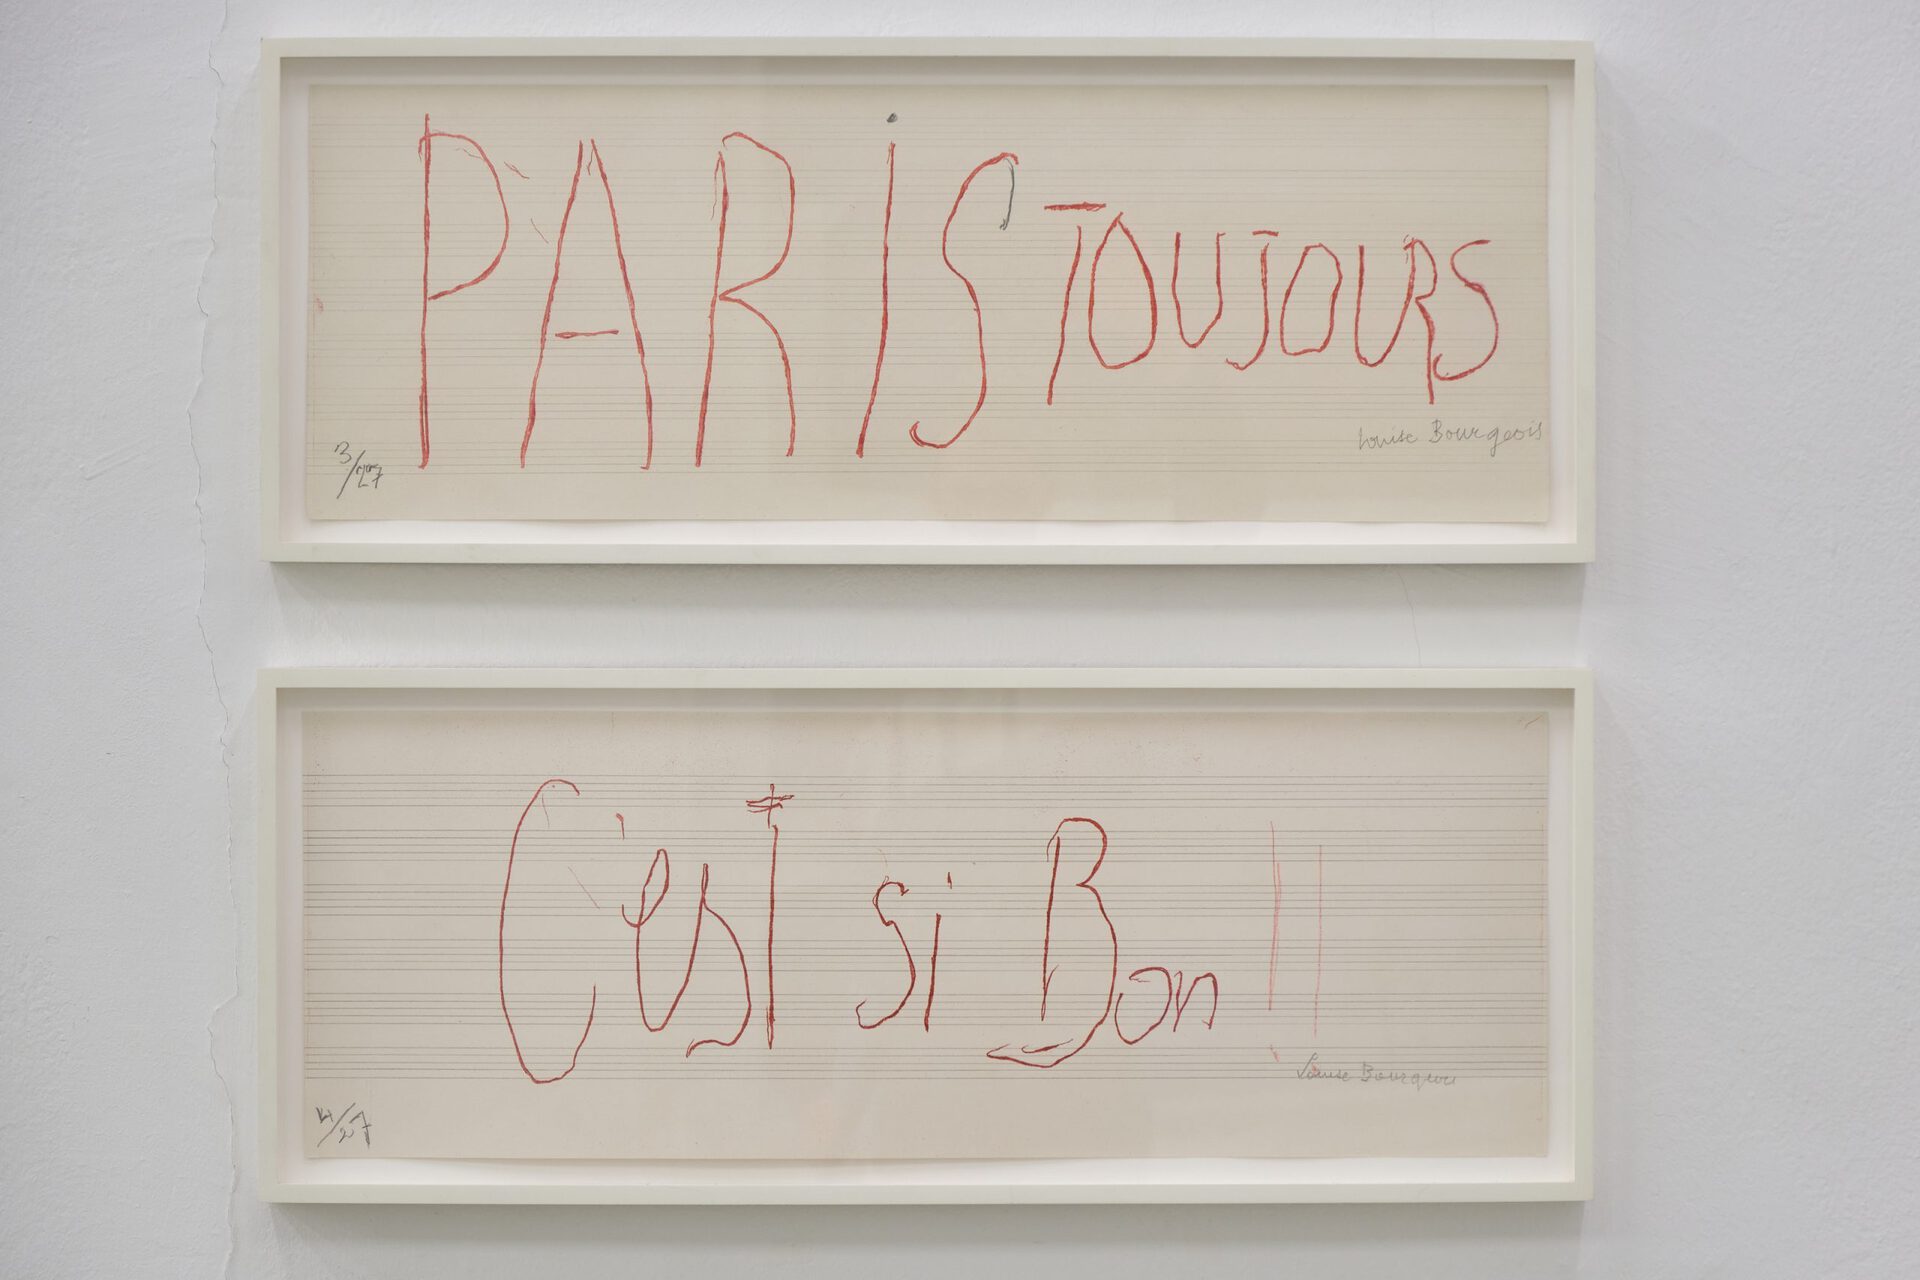 LOUISE BOURGEOIS Paris Toujours / C’est Si Bon!!, 2006 Soft ground etching and red pencil additions on music paper (staves drawn in pencil) Ed. 3/27 + Ed. 4/27 28,6 x 81,3 cm / 29,2 x 81 cm Courtesy Christine König Galerie, Vienna